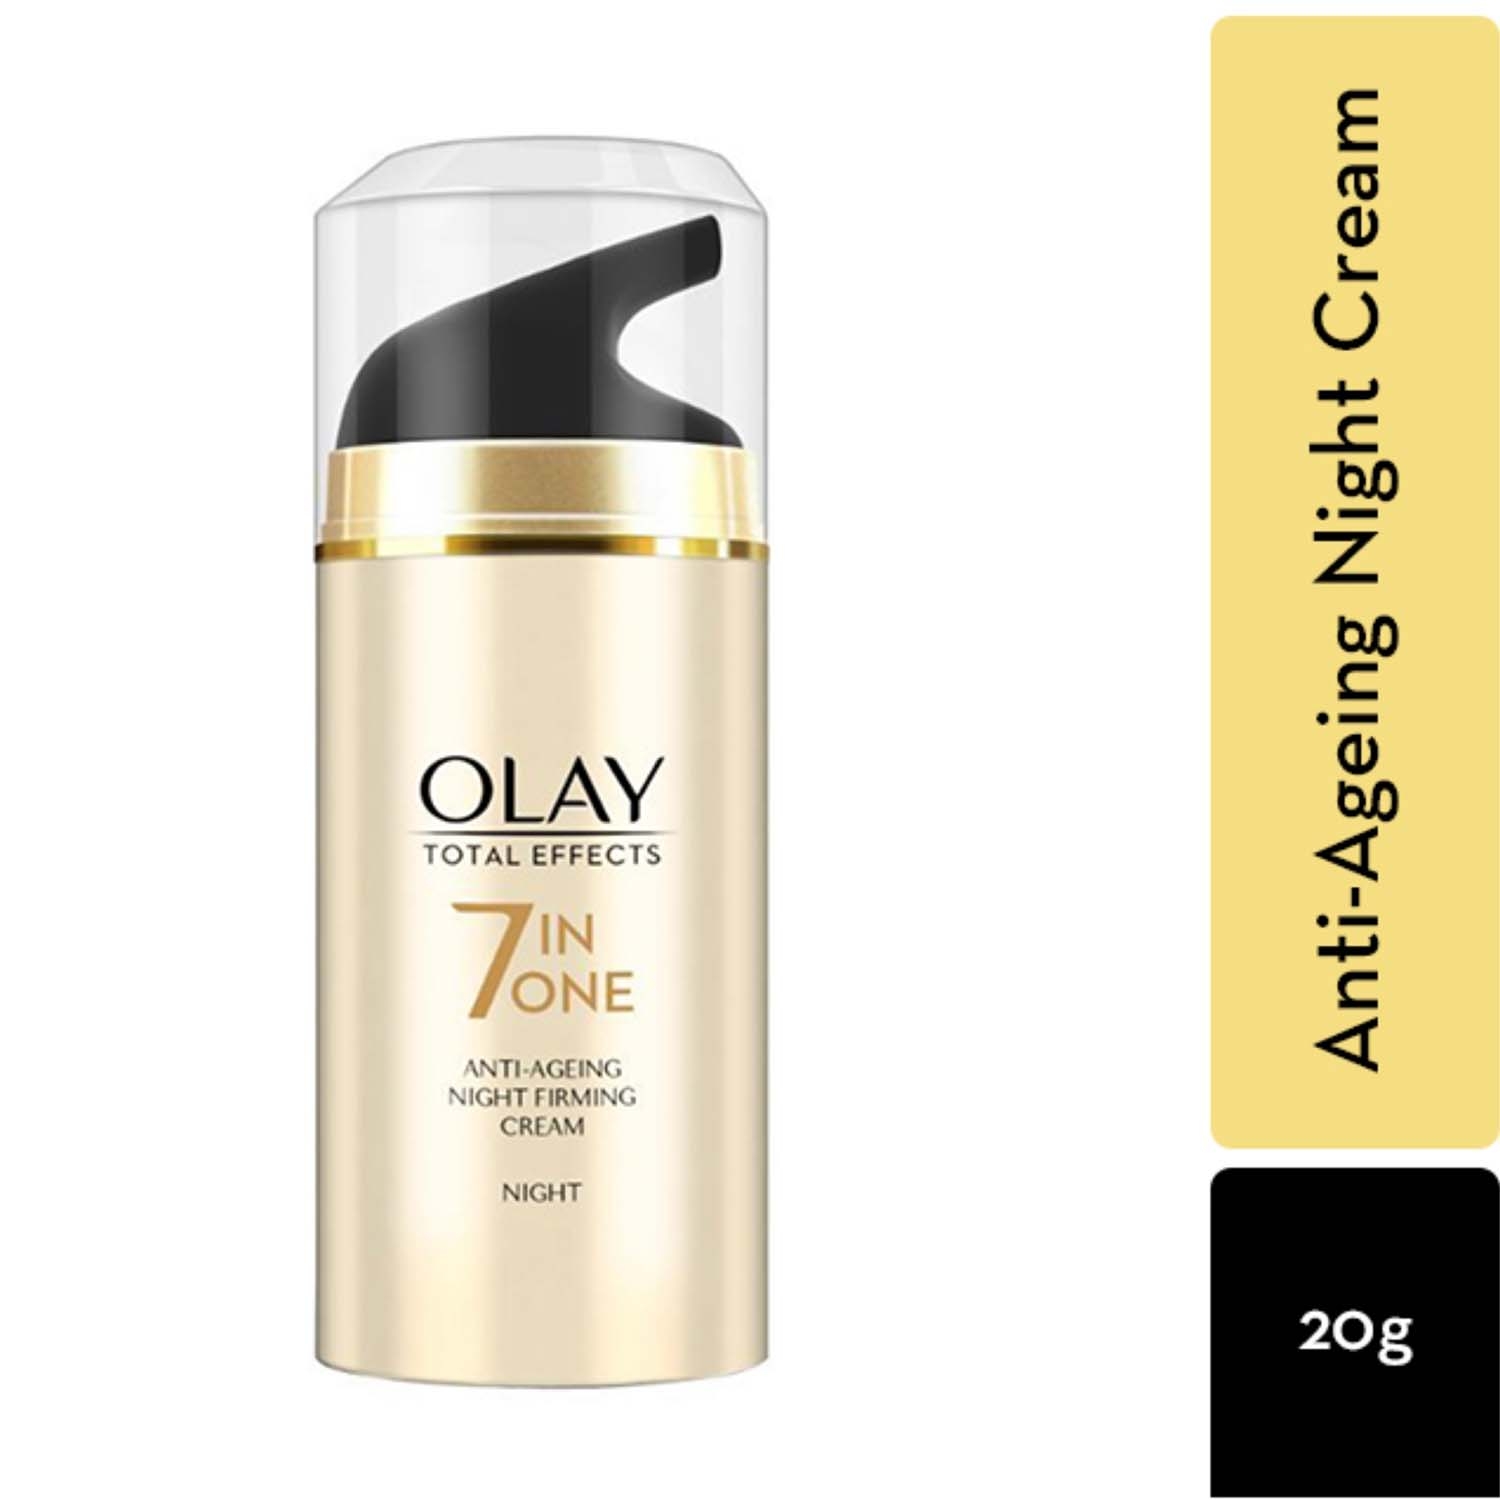 Olay | Olay 7-In-1 Total Effects Night Cream (20g)